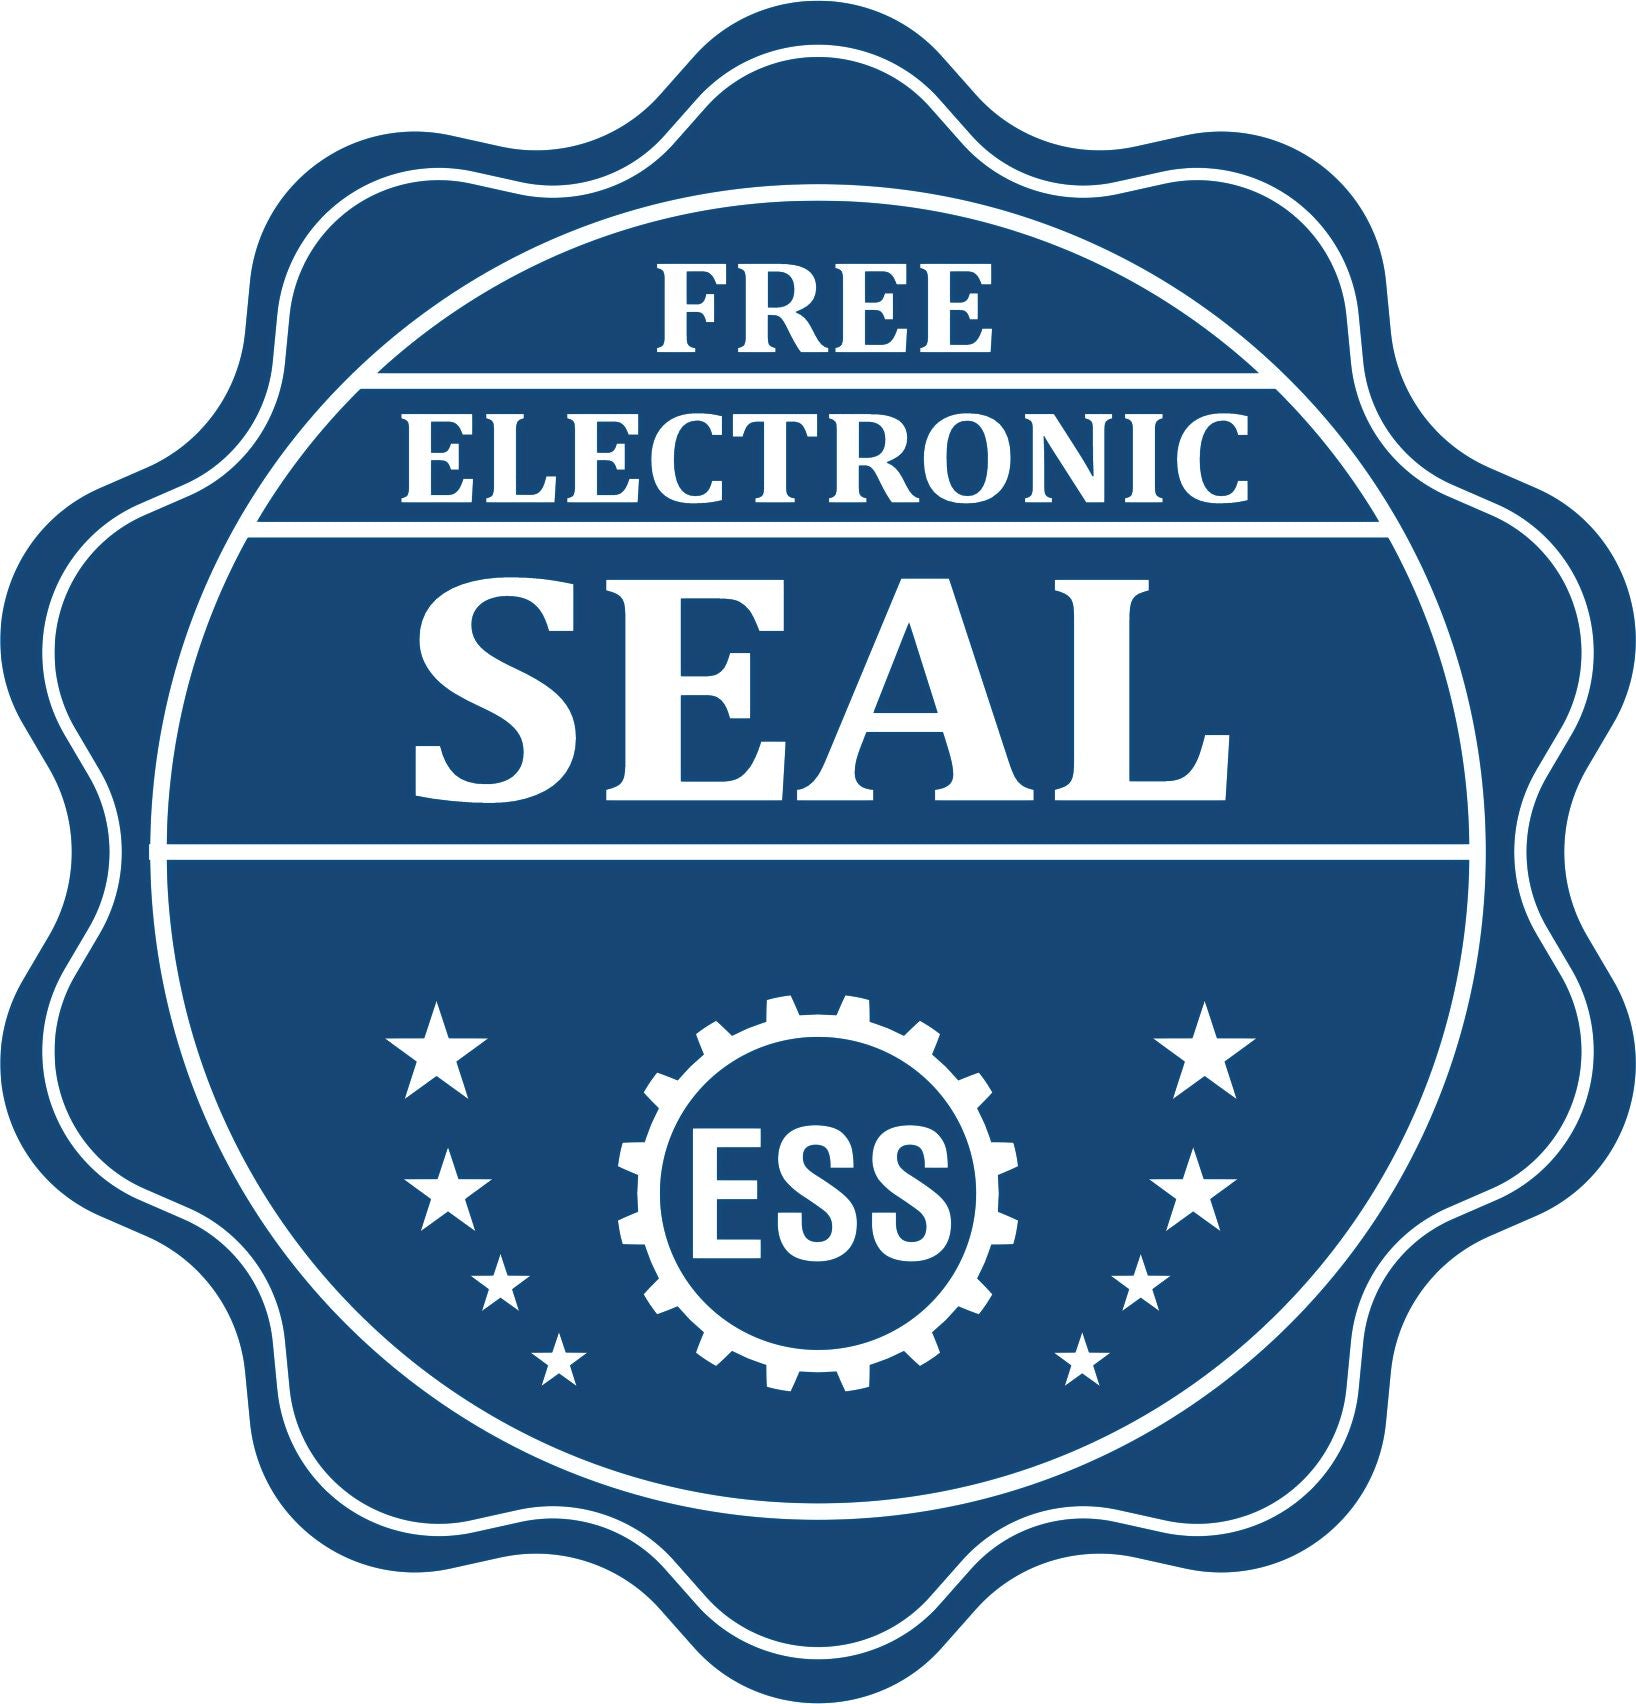 A badge showing a free electronic seal for the Gift Louisiana Landscape Architect Seal with stars and the ESS gear on the emblem.